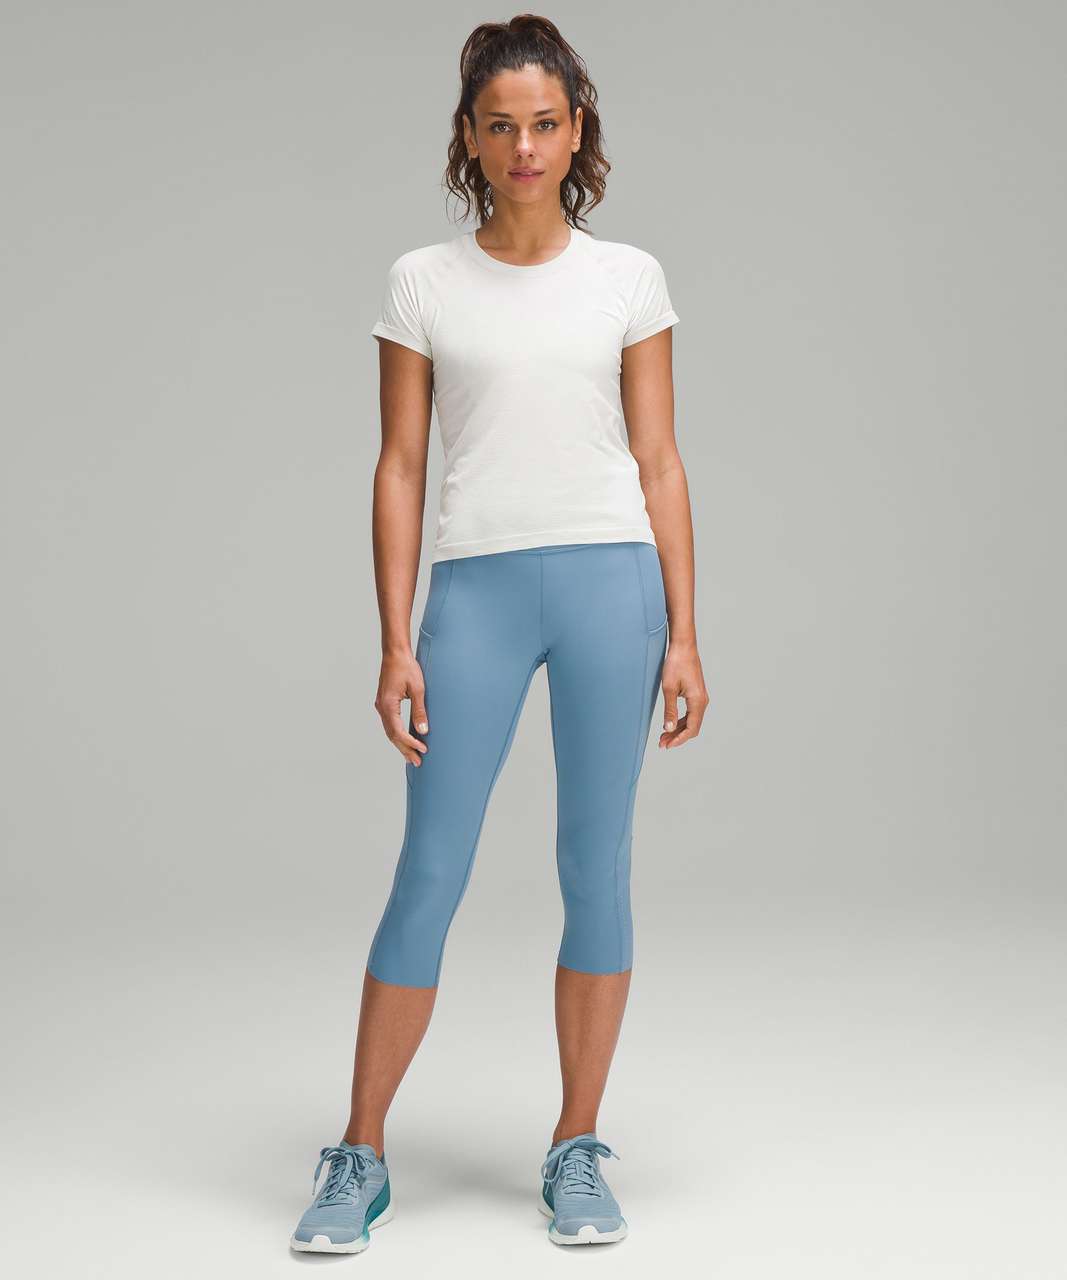 Lululemon Fast and Free Reflective High-Rise Crop 19" - Utility Blue